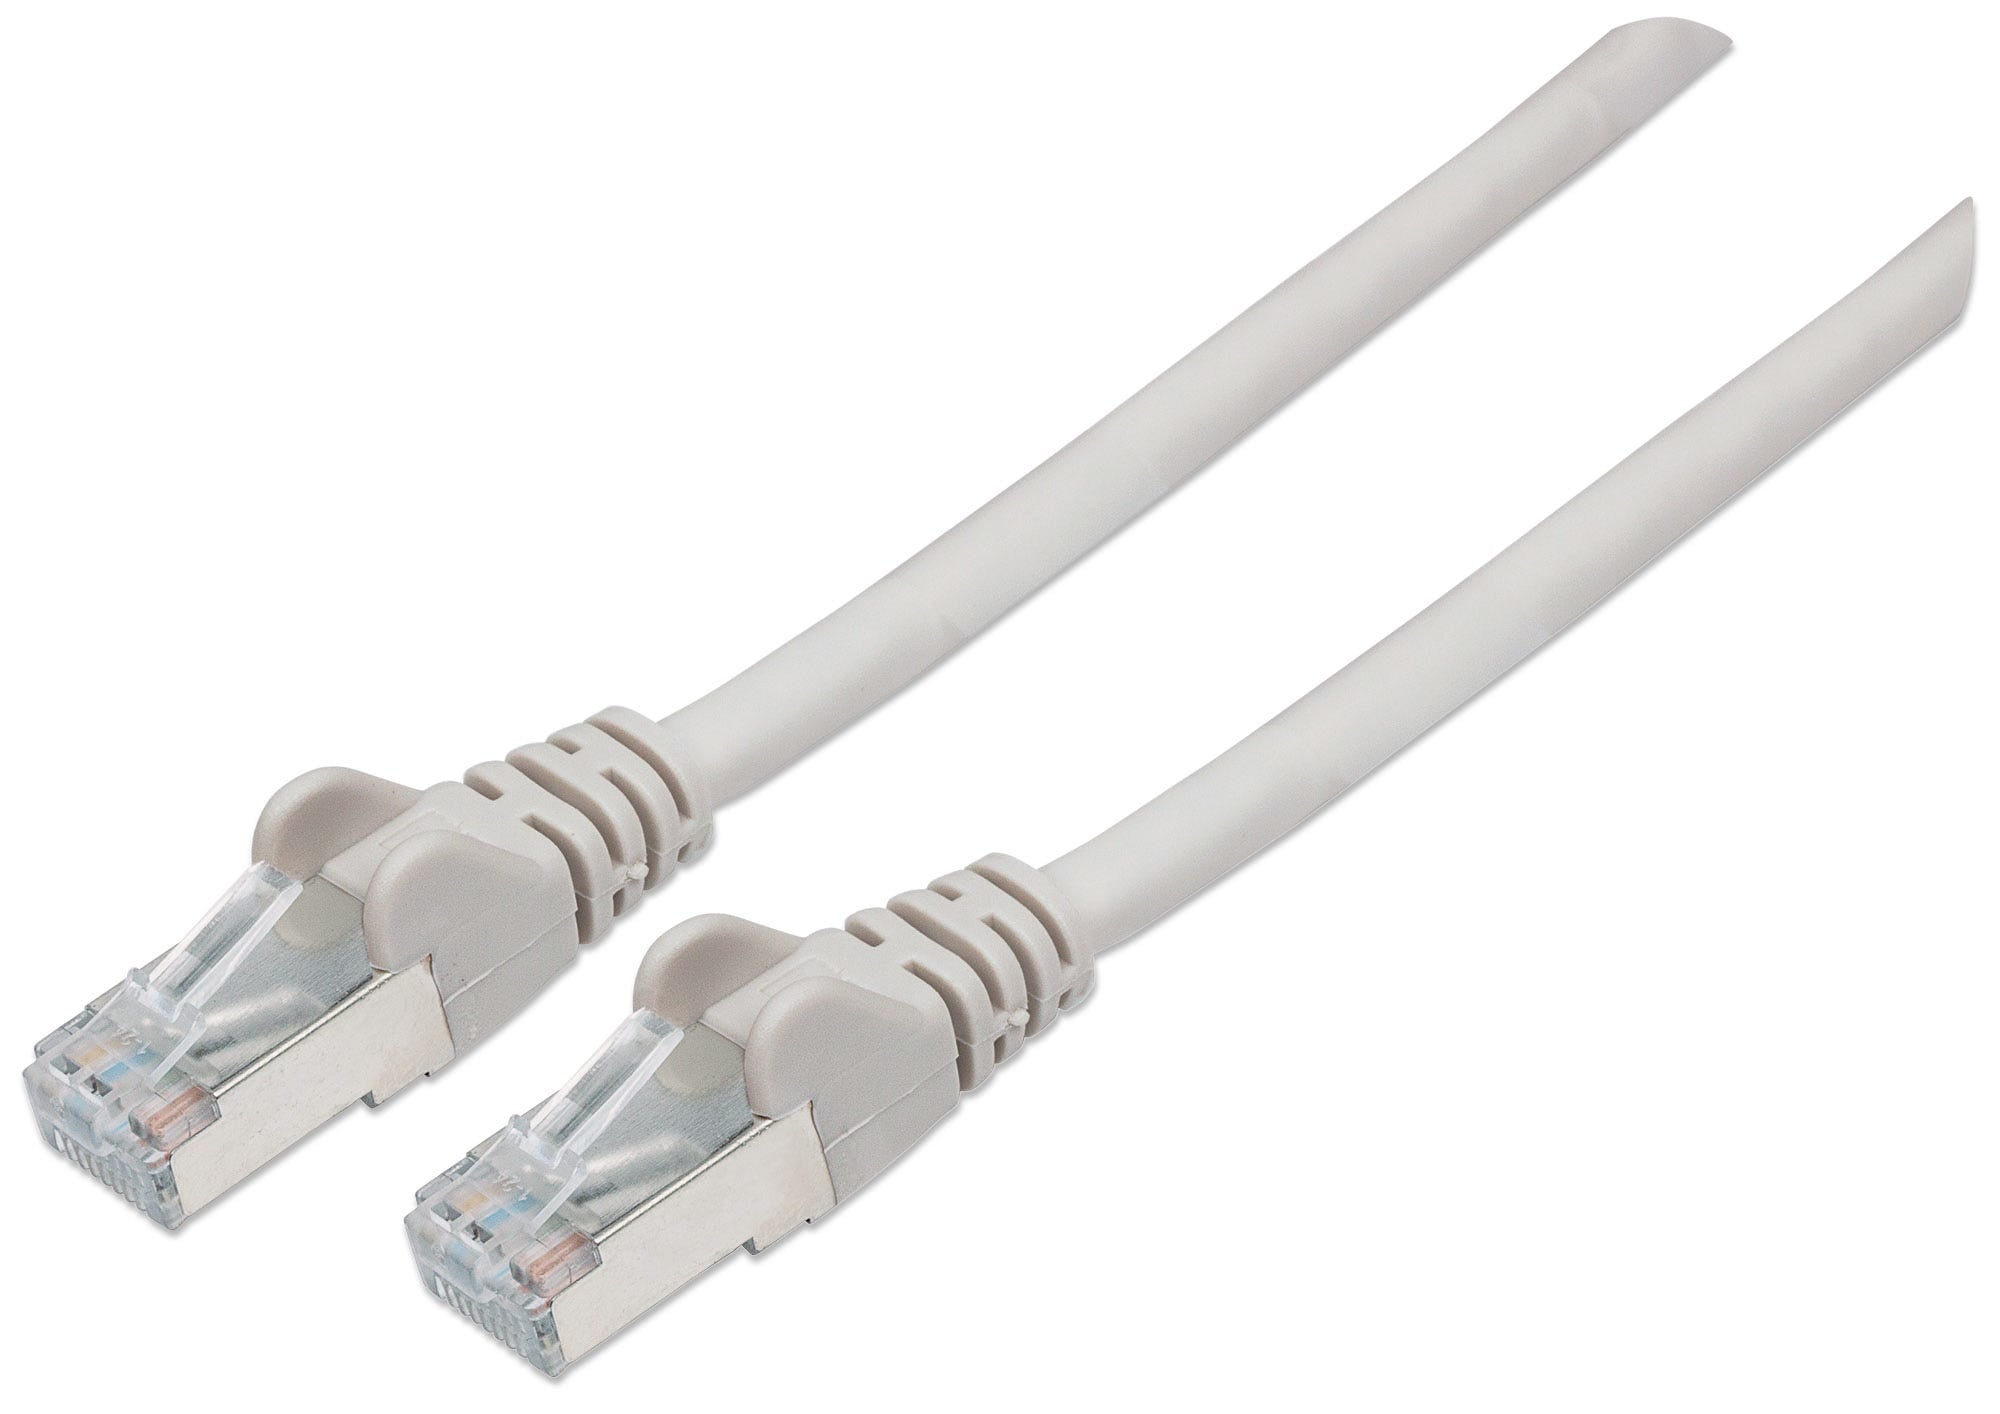 Intellinet Network Patch Cable, Cat6A, 0.5m, Grey, Copper, S/FTP, LSOH / LSZH, PVC, RJ45, Gold Plated Contacts, Snagless, Booted, Lifetime Warranty, Polybag